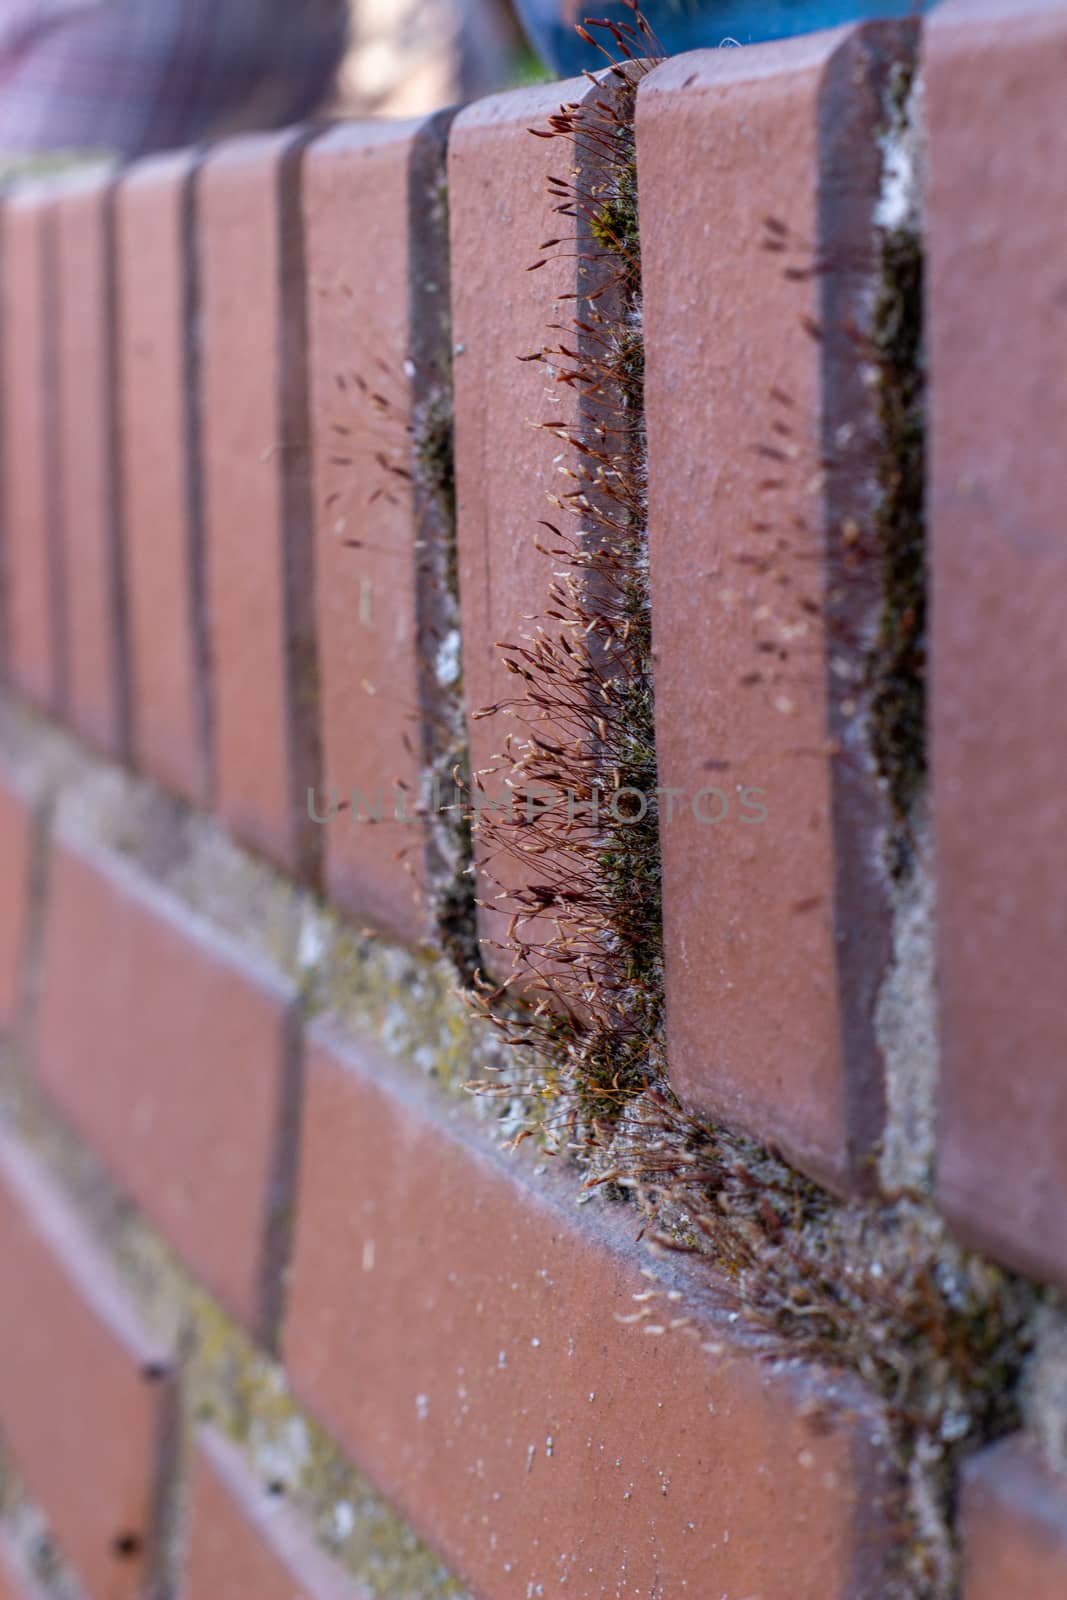 Moss among the bricks of the building.